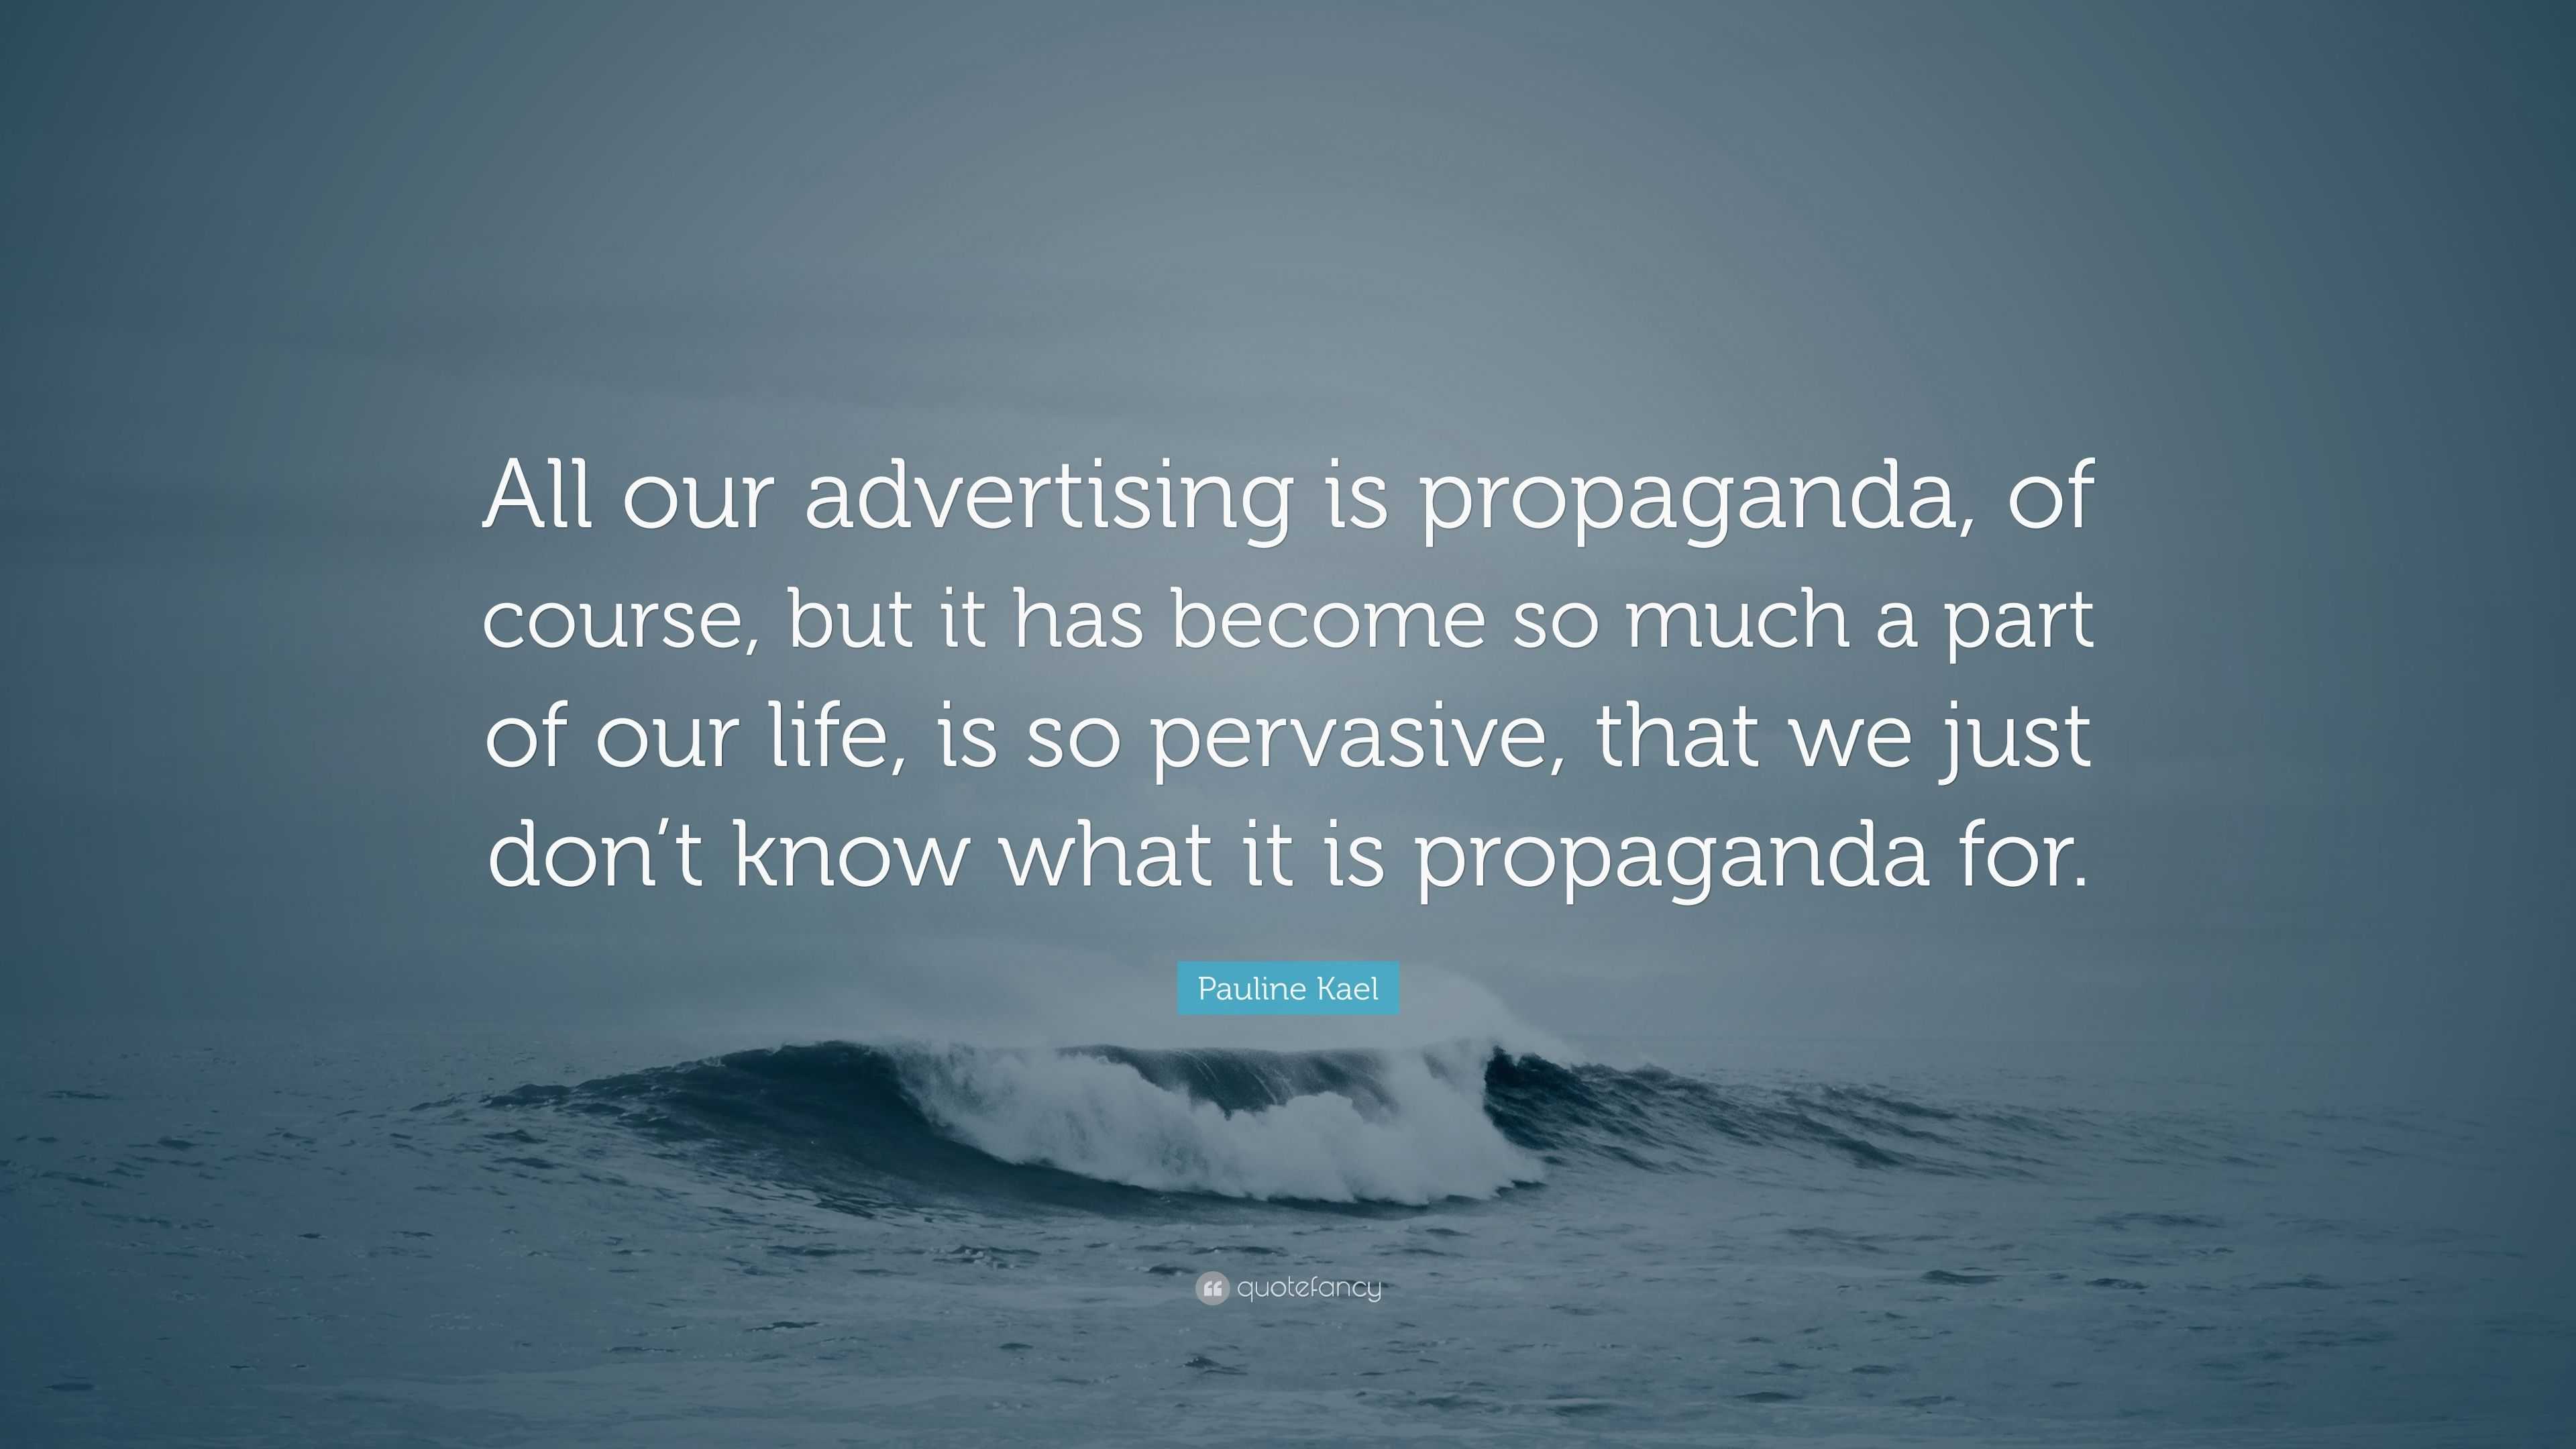 Pauline Kael Quote: “All our advertising is propaganda, of course, but ...